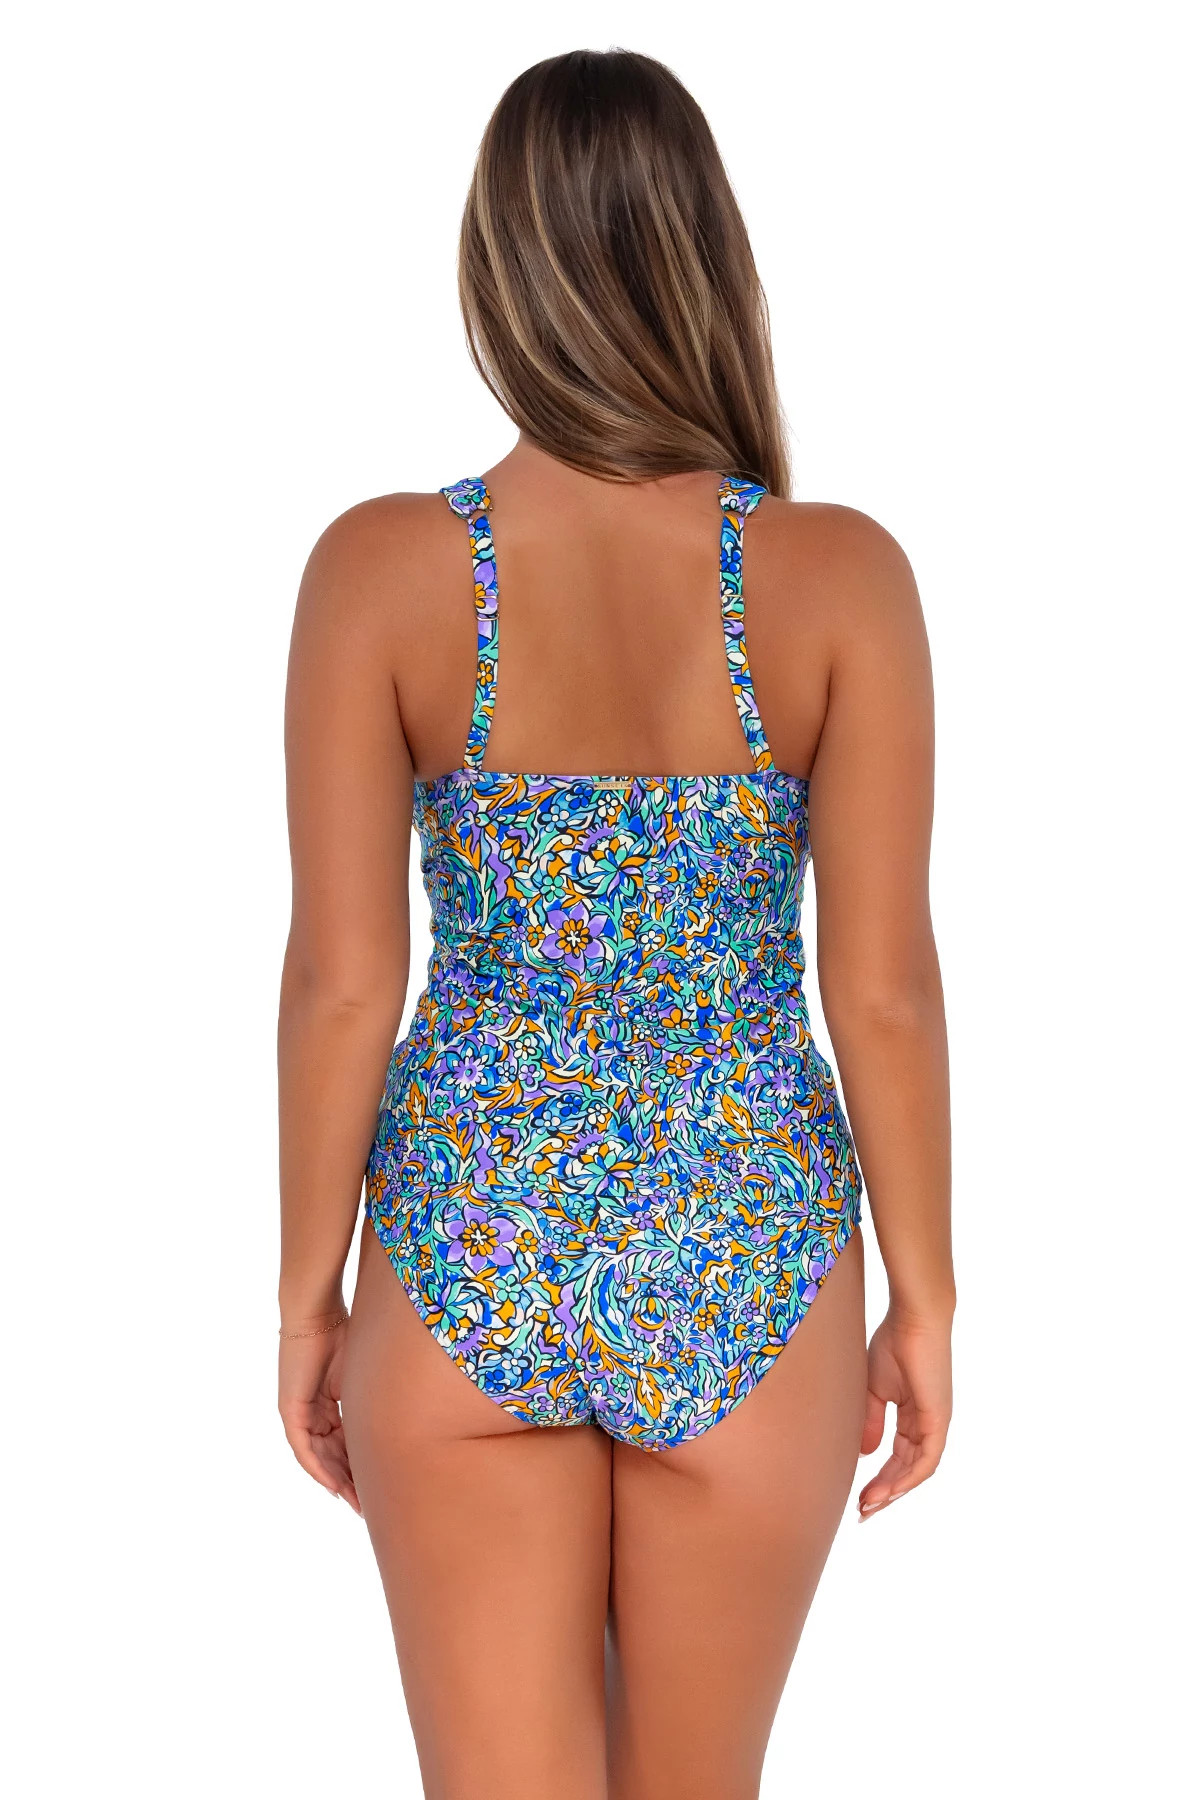 PANSY FIELDS Elsie Underwire Tankini Top (D+ Cup) image number 2